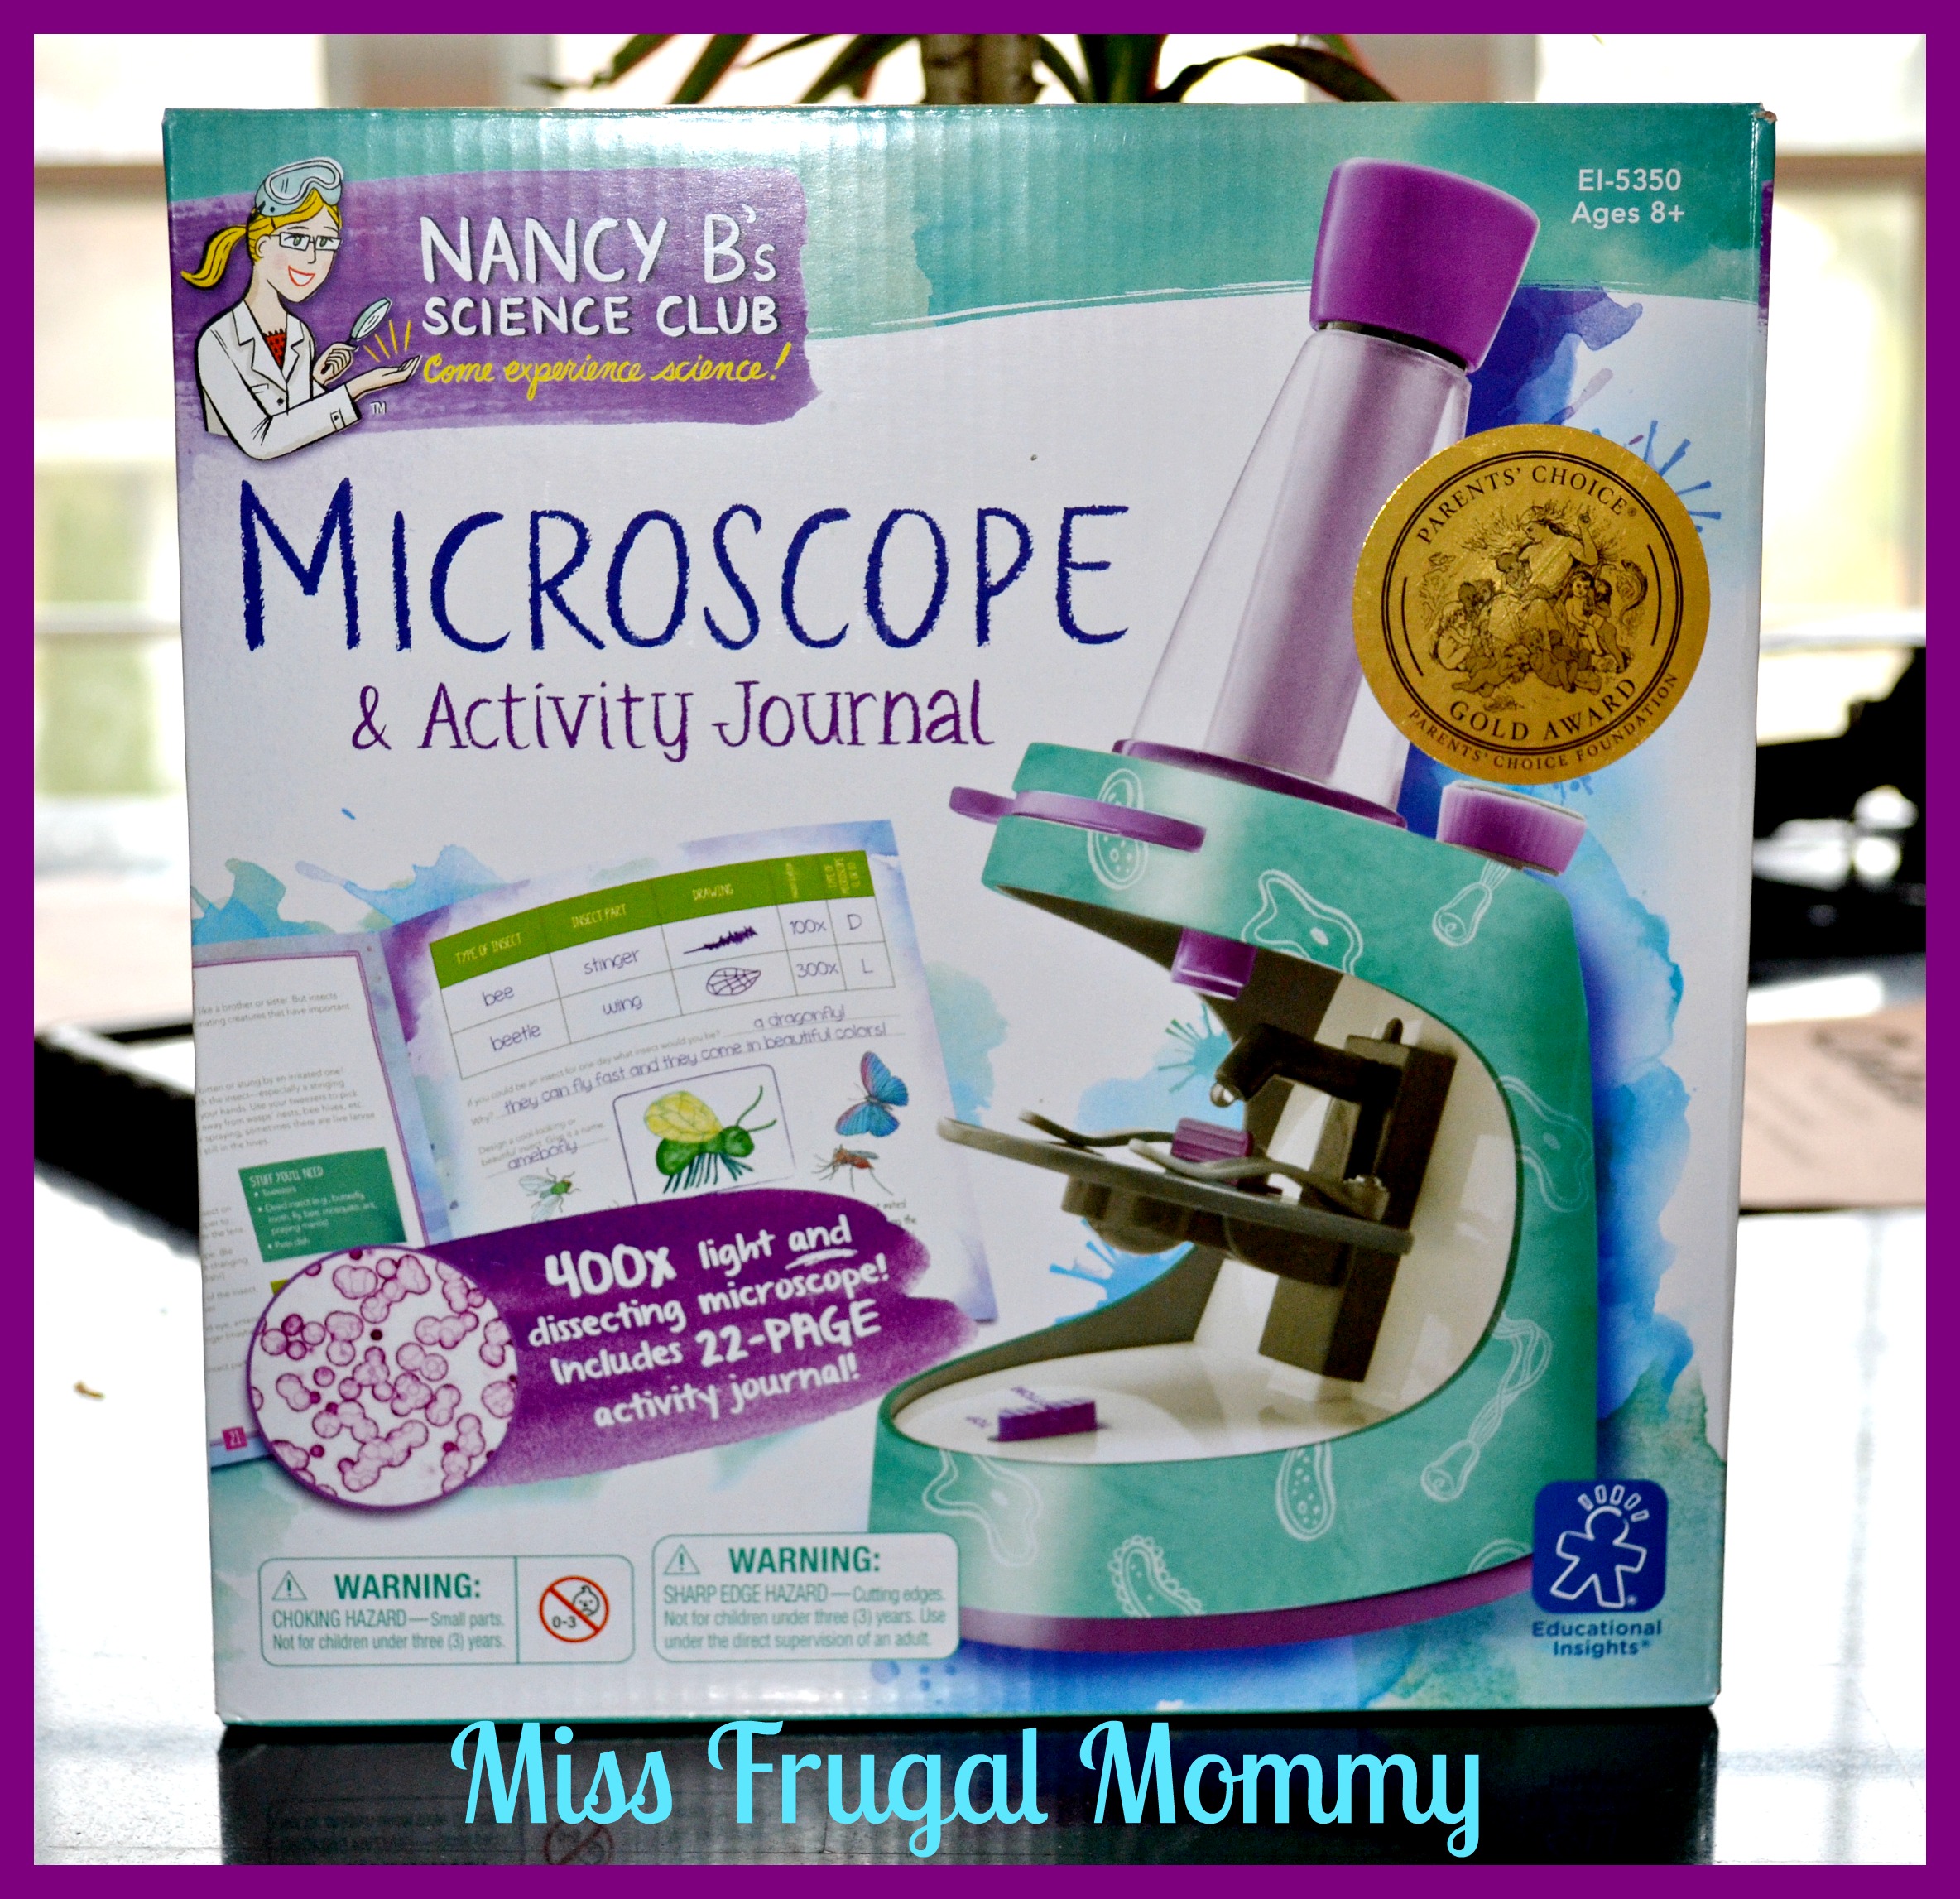 Nancy B's Microscope by Educational Insights‏ Review